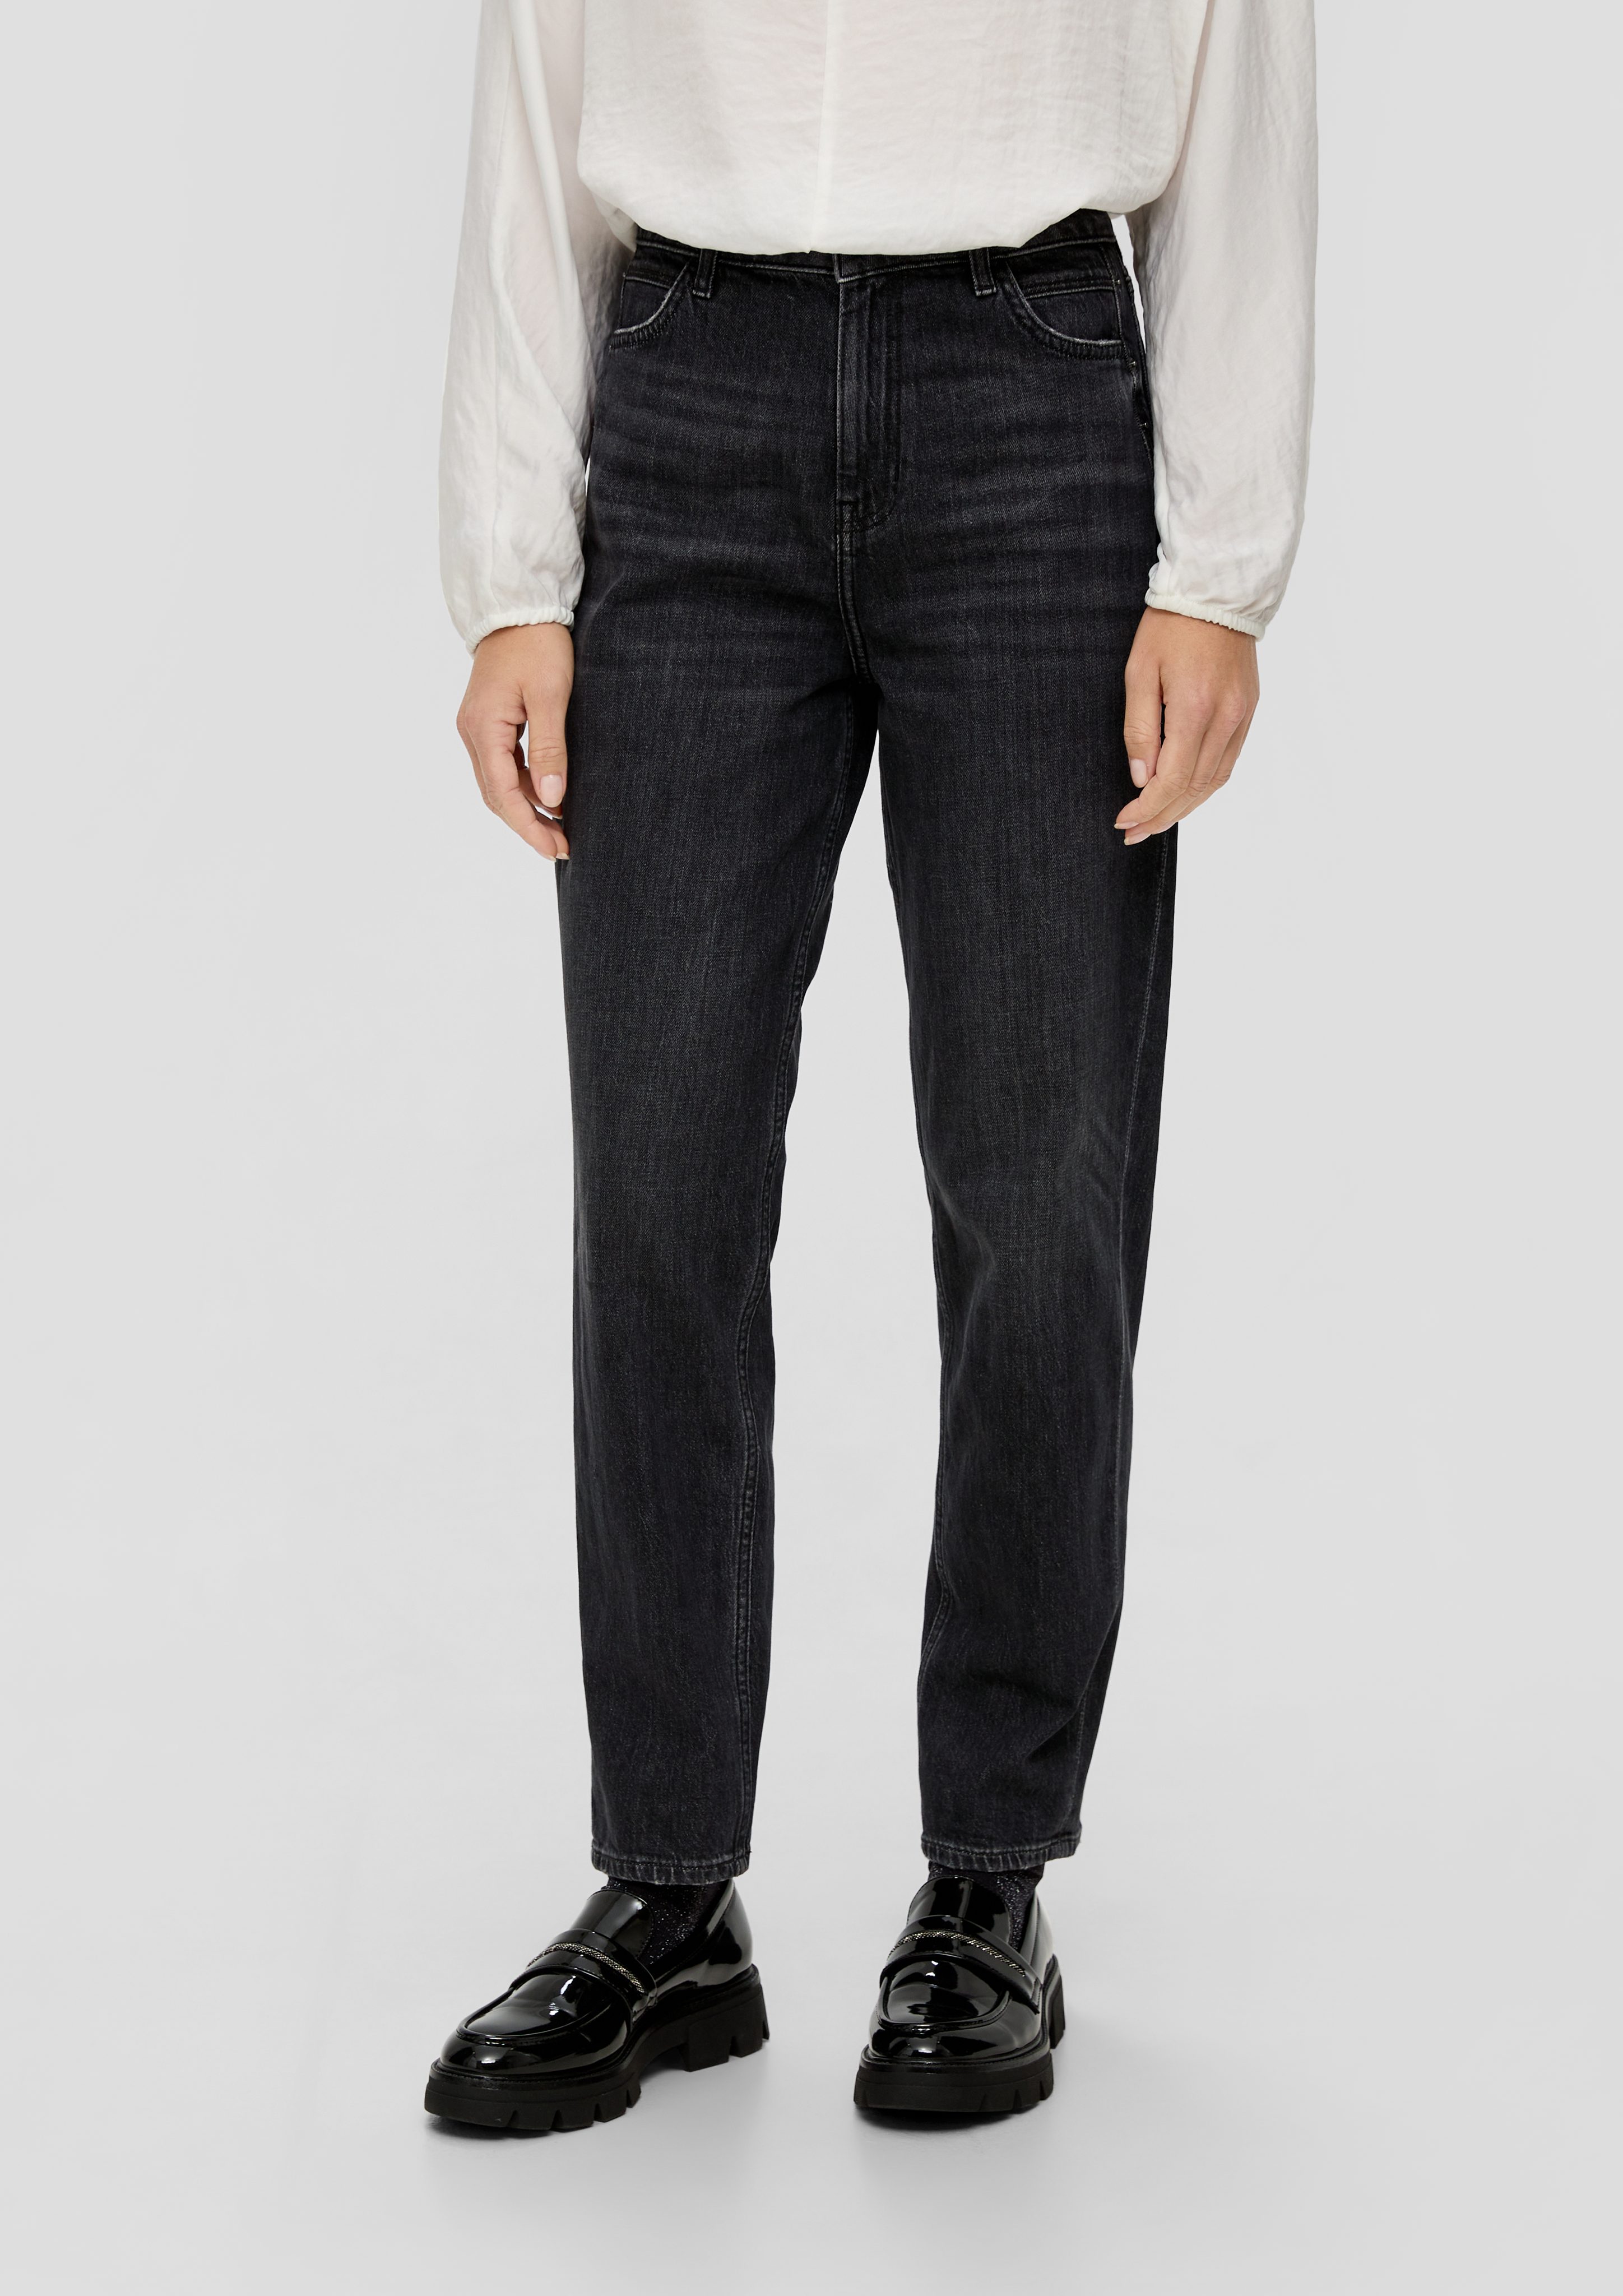 s.Oliver 7/8-Jeans Ankle-Jeans graphit Nieten / / Rise / Waschung, Fit High Leg Tapered Label-Patch, Regular